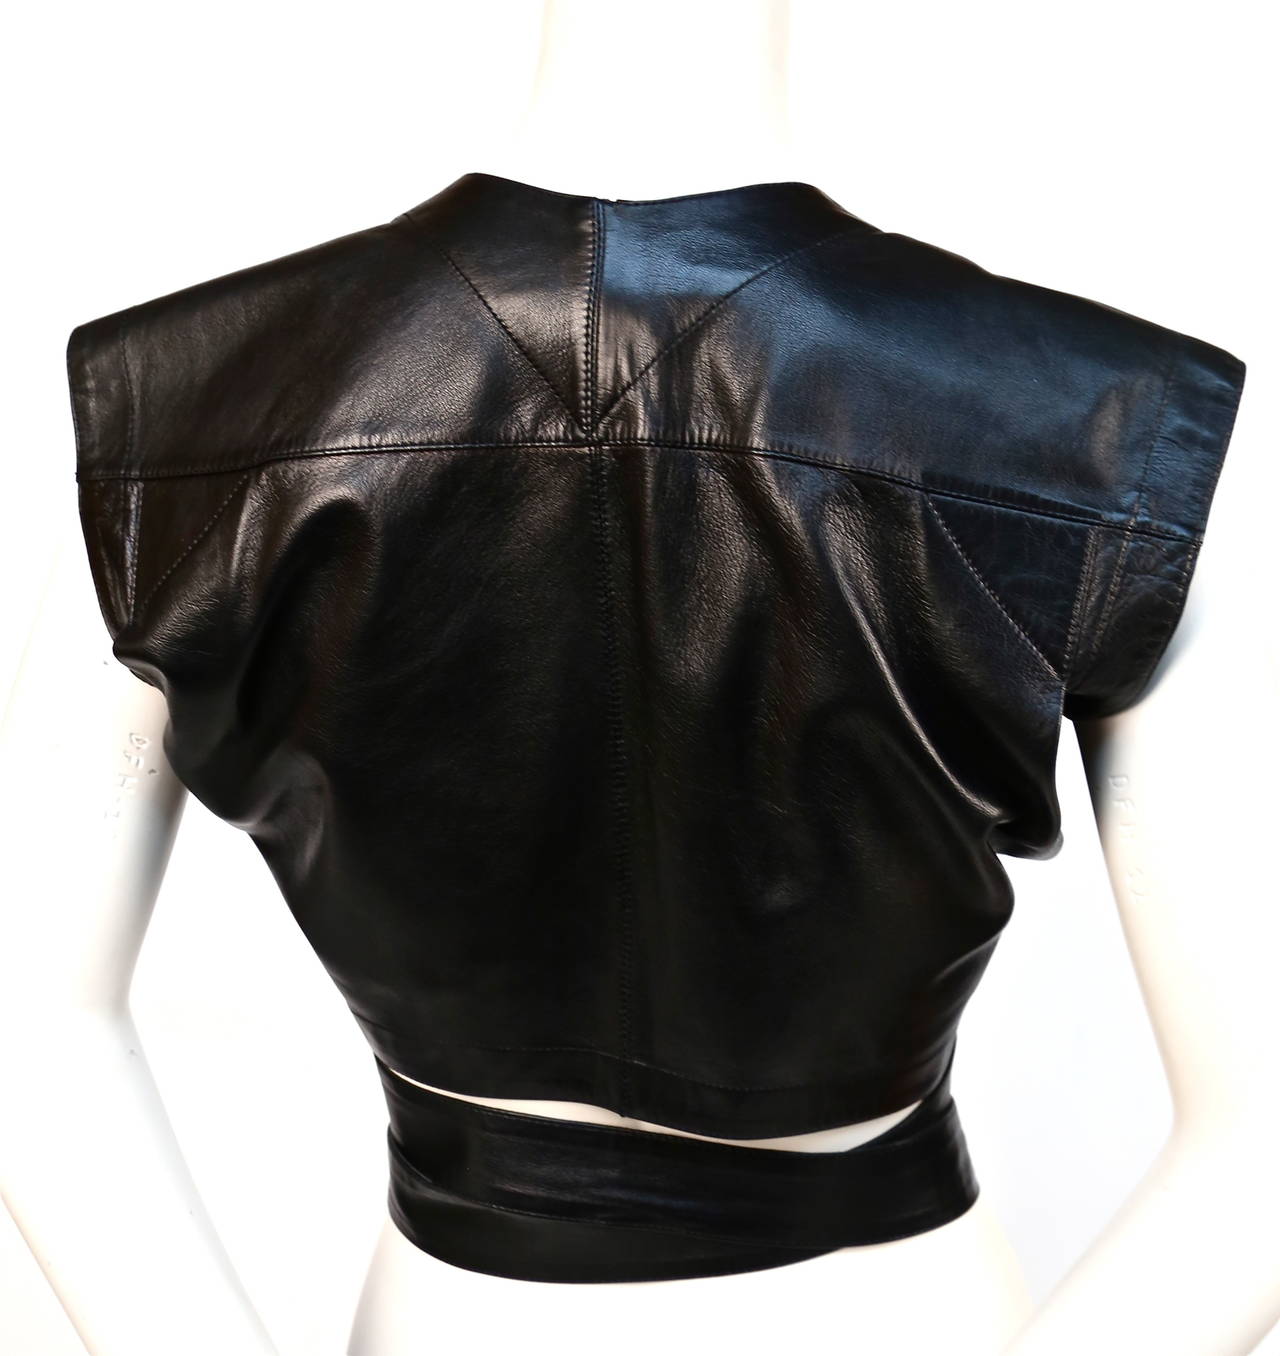 Jet black leather wrap bustier top with belt and silver buckle from Azzedine Alaia dating to the 1990's. No size is indicated however this bustier top best fits a US 4-6. It is adjustable and could probably fit a size 8 with a small waist. Very good